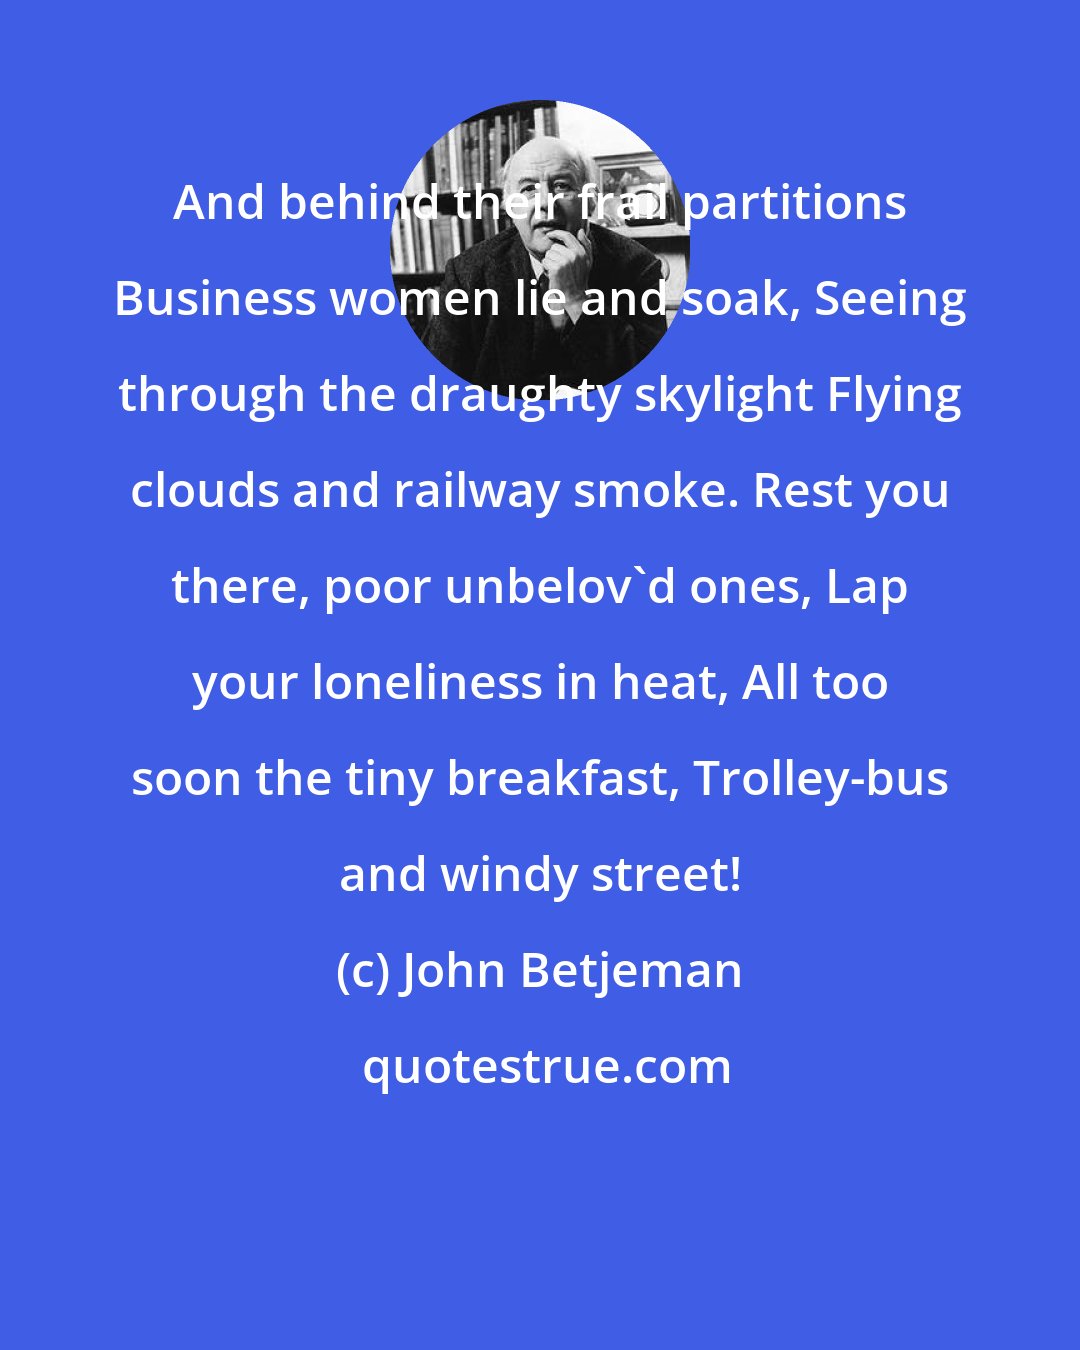 John Betjeman: And behind their frail partitions Business women lie and soak, Seeing through the draughty skylight Flying clouds and railway smoke. Rest you there, poor unbelov'd ones, Lap your loneliness in heat, All too soon the tiny breakfast, Trolley-bus and windy street!